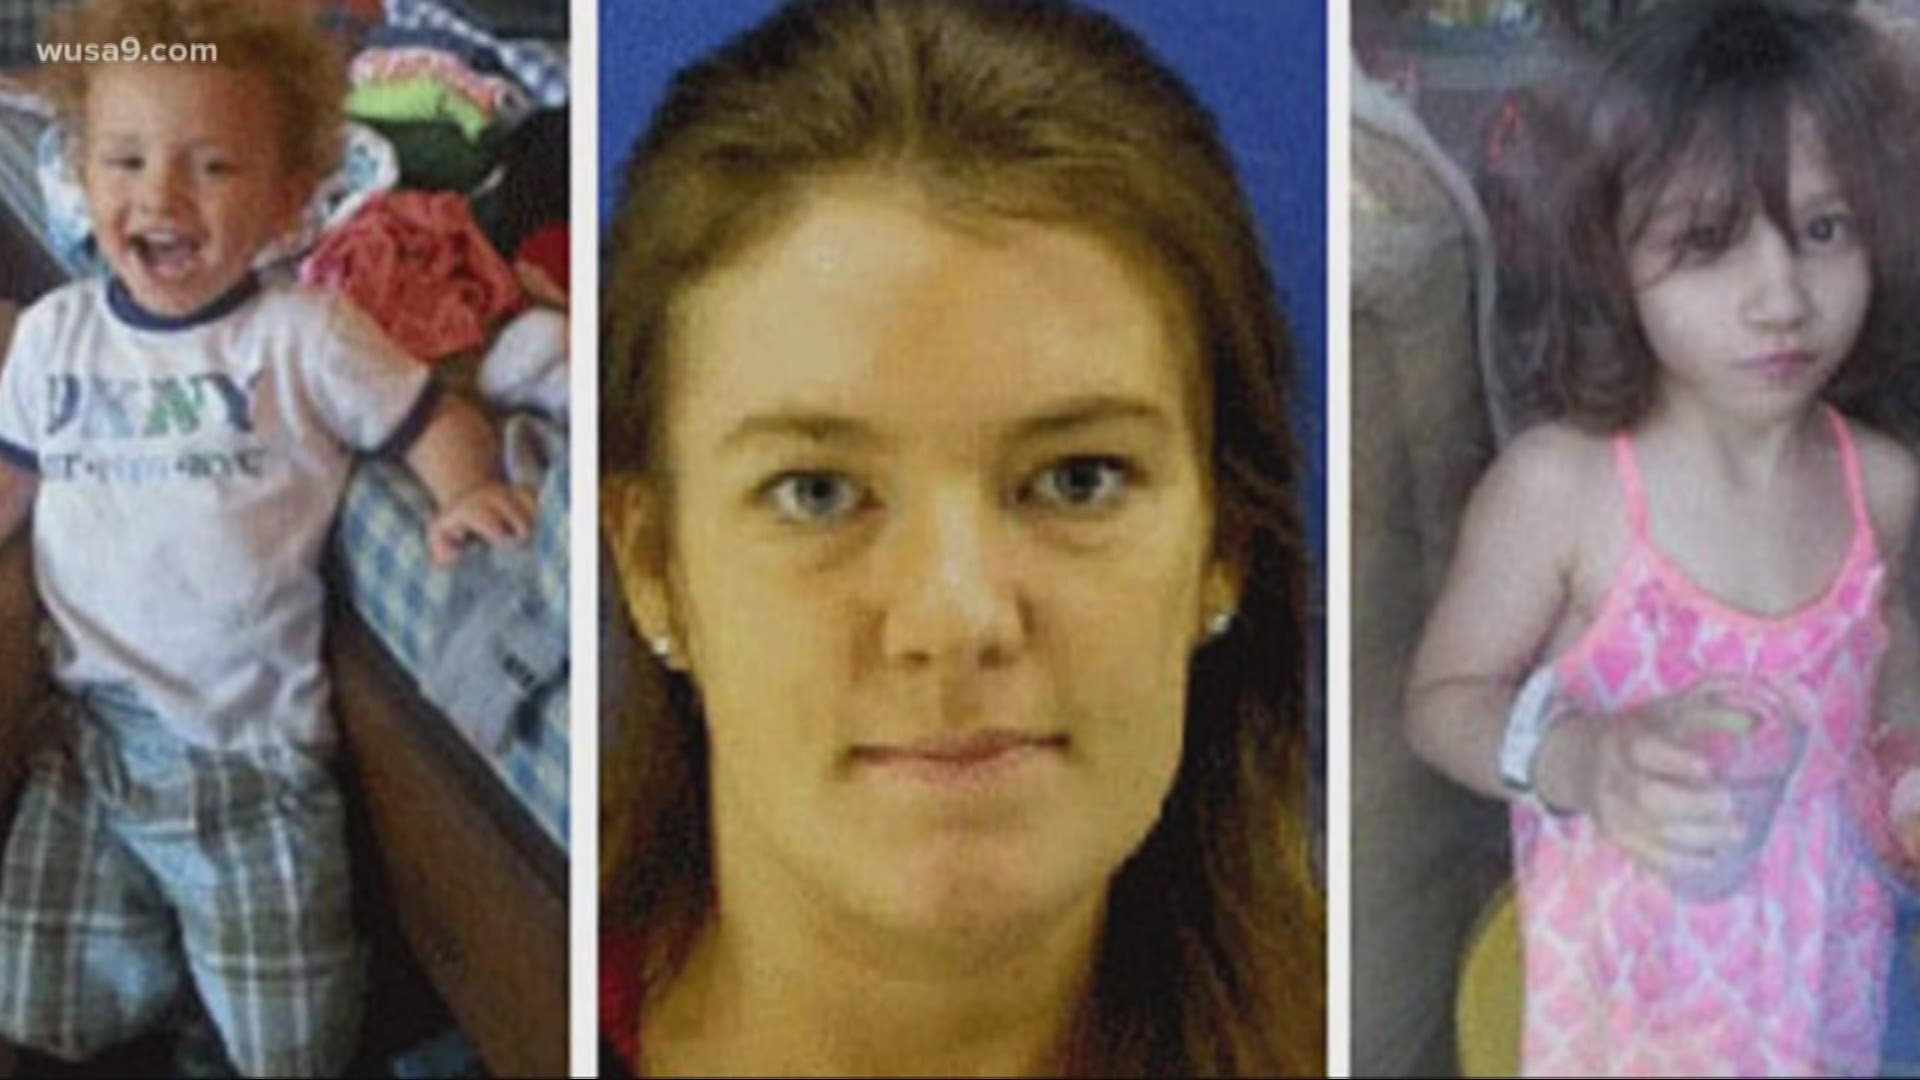 Maryland law mandates that charges be dropped five years later if the accused is incompetent to stand trial. Catherine Hoggle has been confined in a mental hospital since 2014 in the disappearance of Jacob, 2, and Sarah, 3.